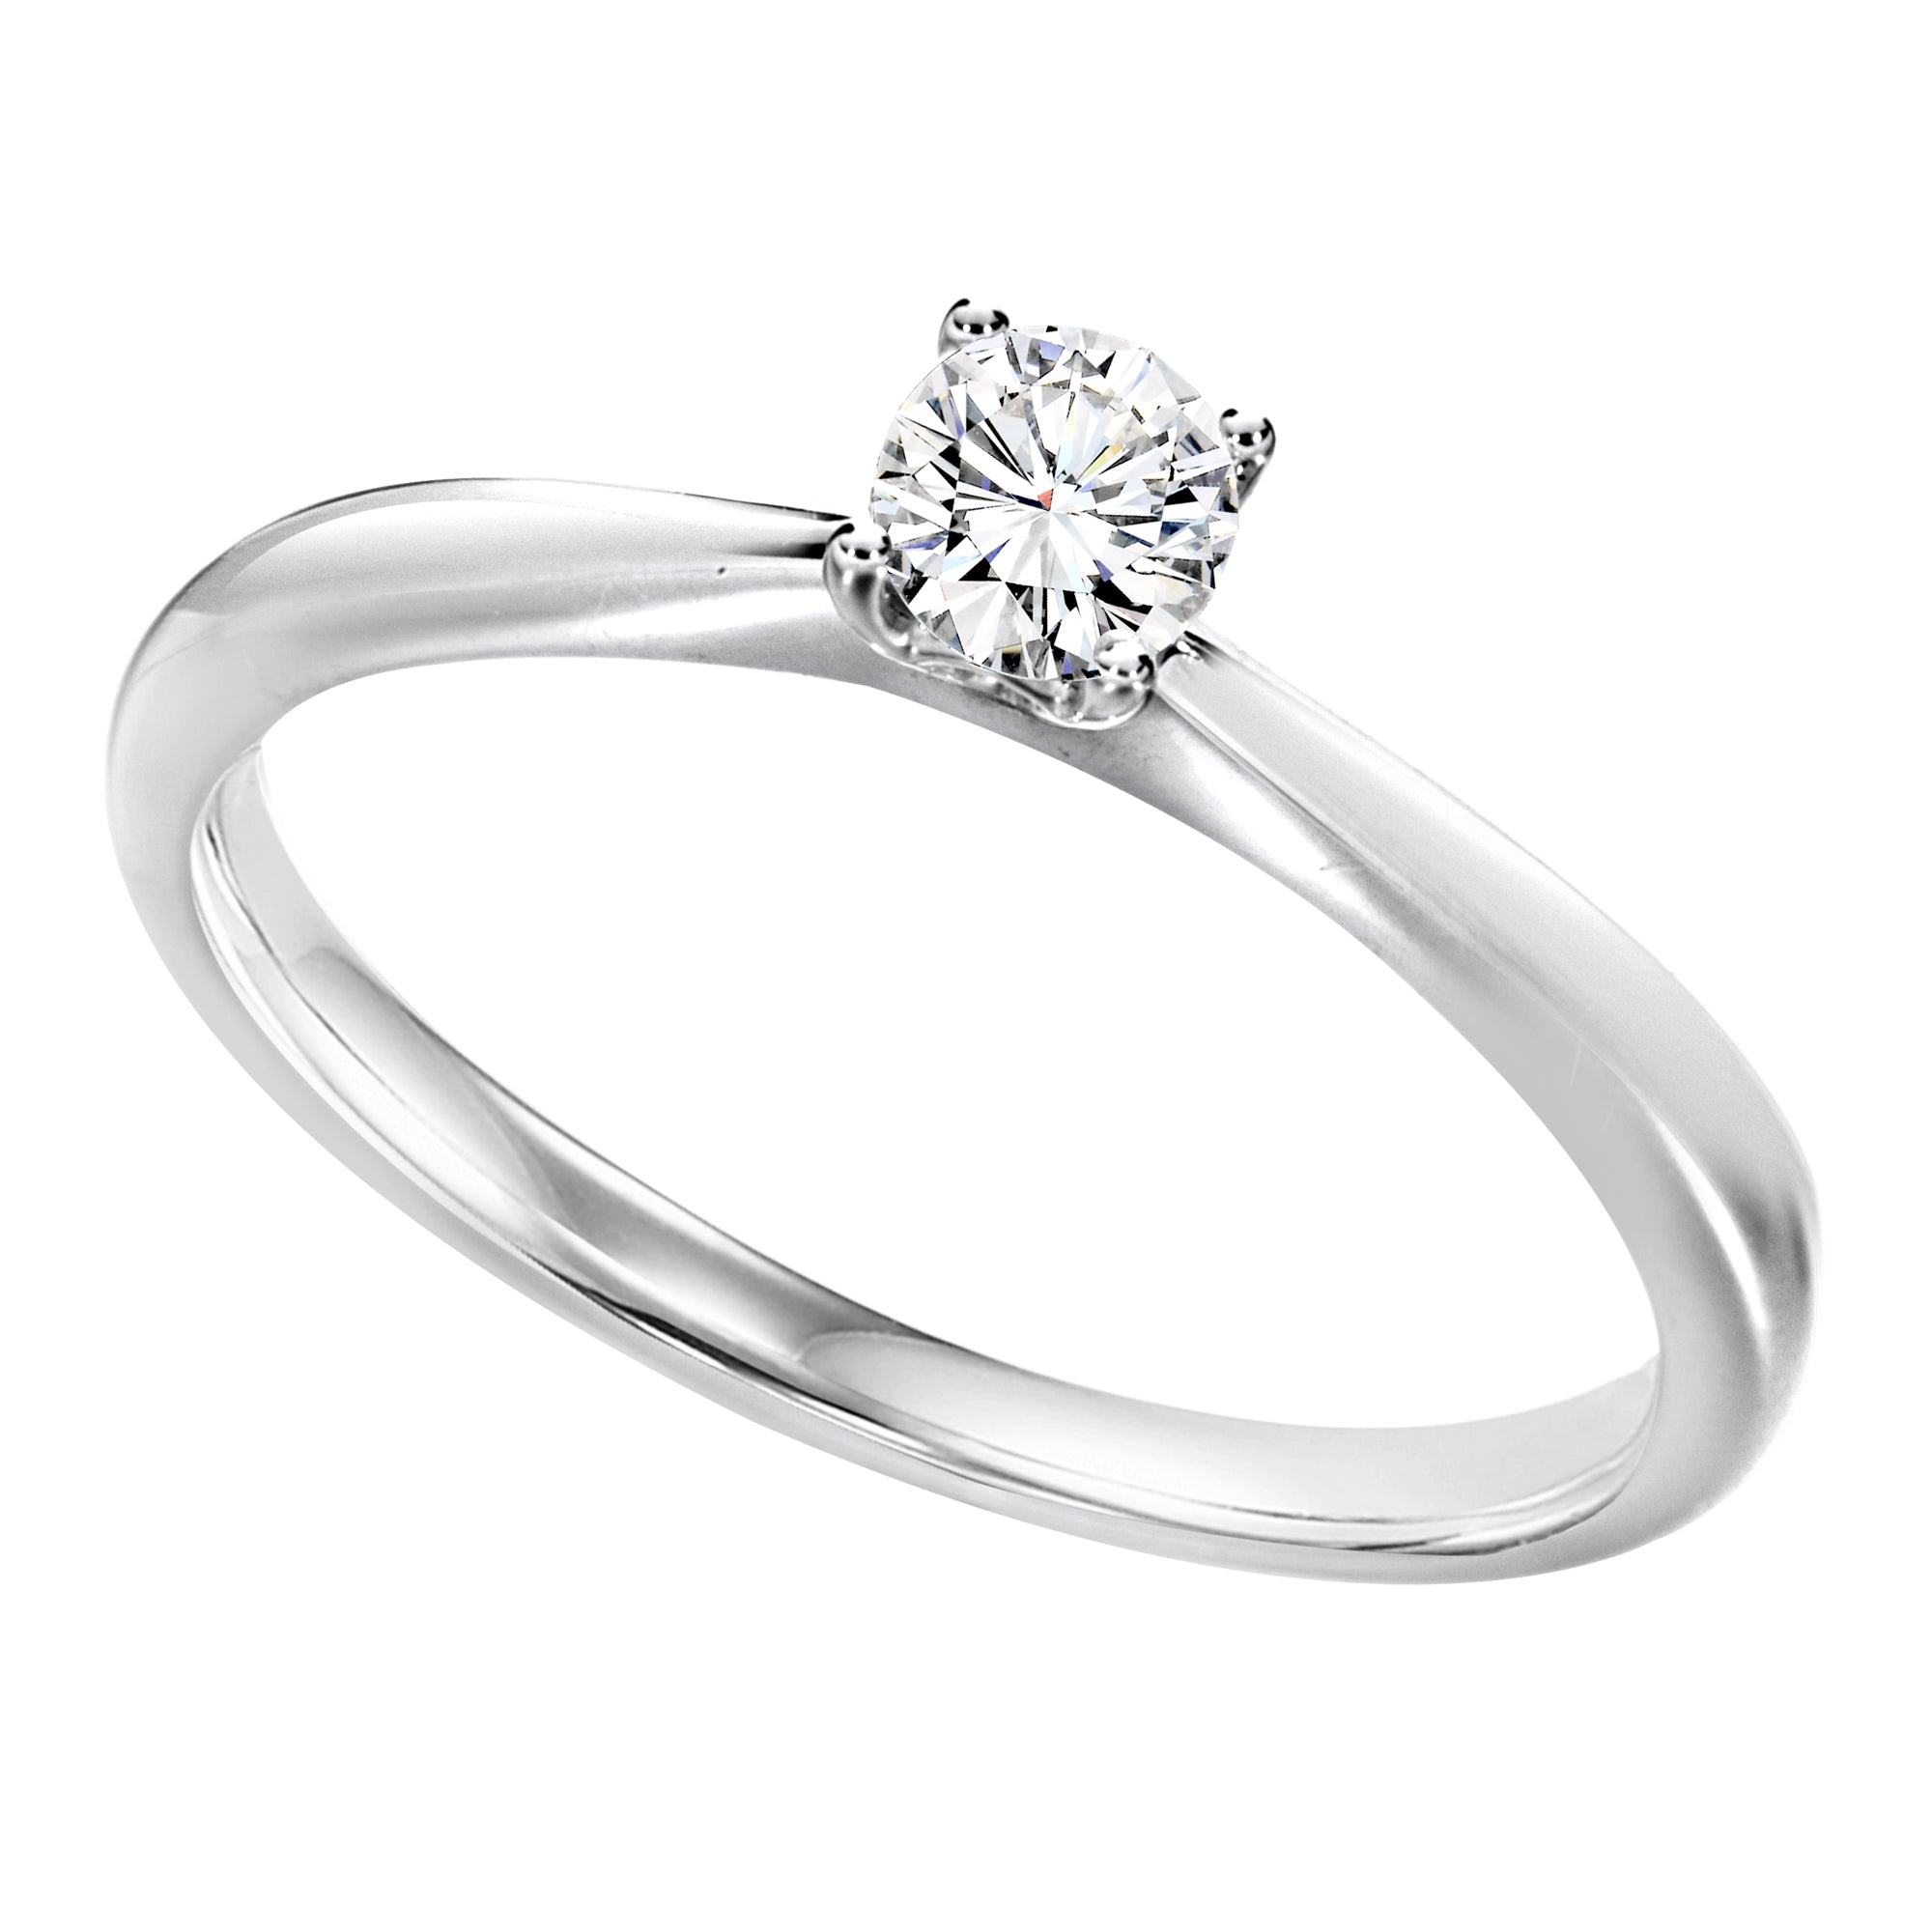 Sterling Silver Cubic Zirconia 0.50ct Ring - AK1046 - Hallmark Jewellers Formby & The Jewellers Bench Widnes